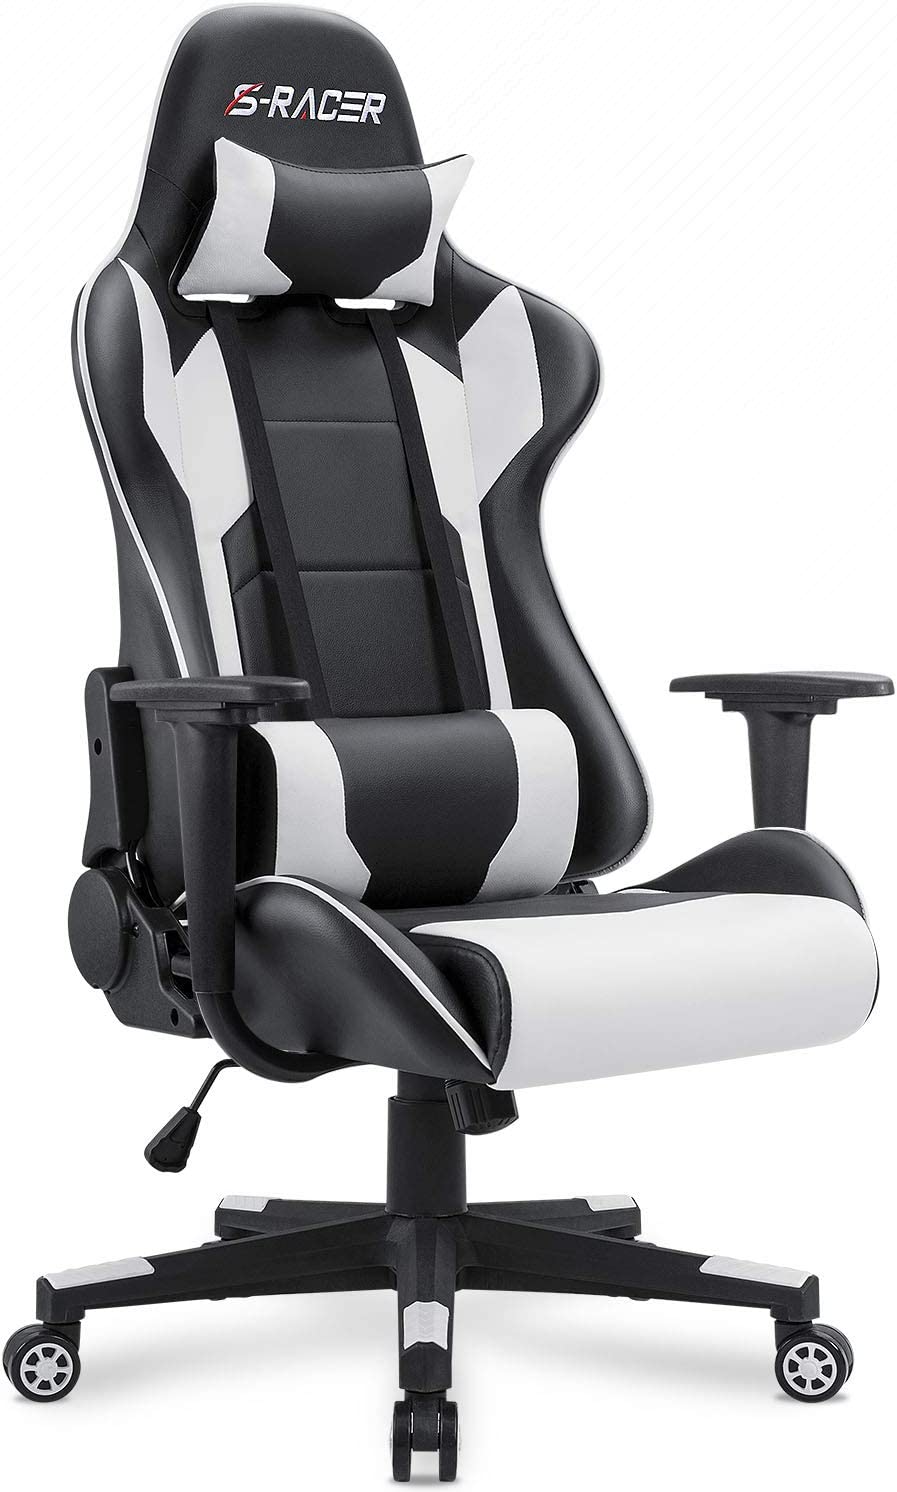 Best Gaming Chair on a Budget